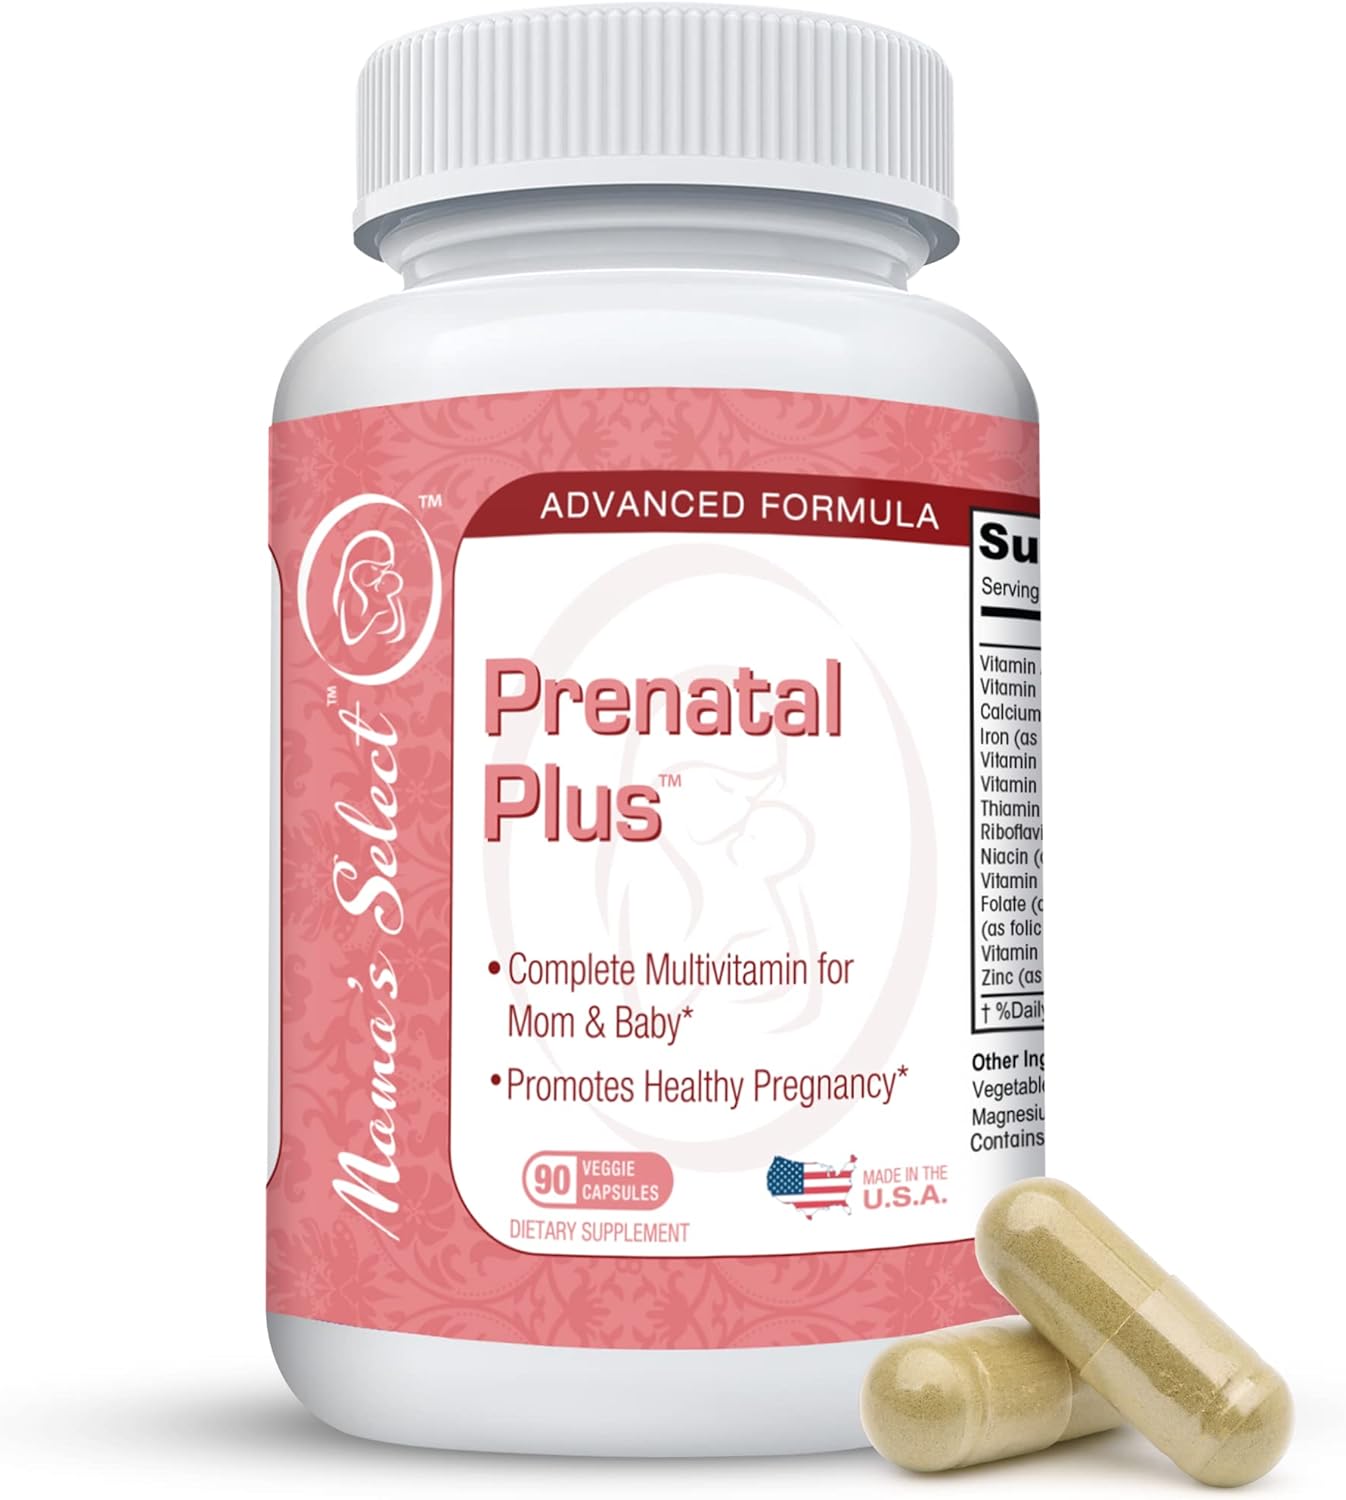 Mama’s Select Prenatal Plus, Natural Prenatal Vitamins for Women, 1 a Day Serving, Methylfolate Complete Vitamins for Pregnant Women and Women Trying to Conceive - Easy to Swallow - 90 Veggie Capsules